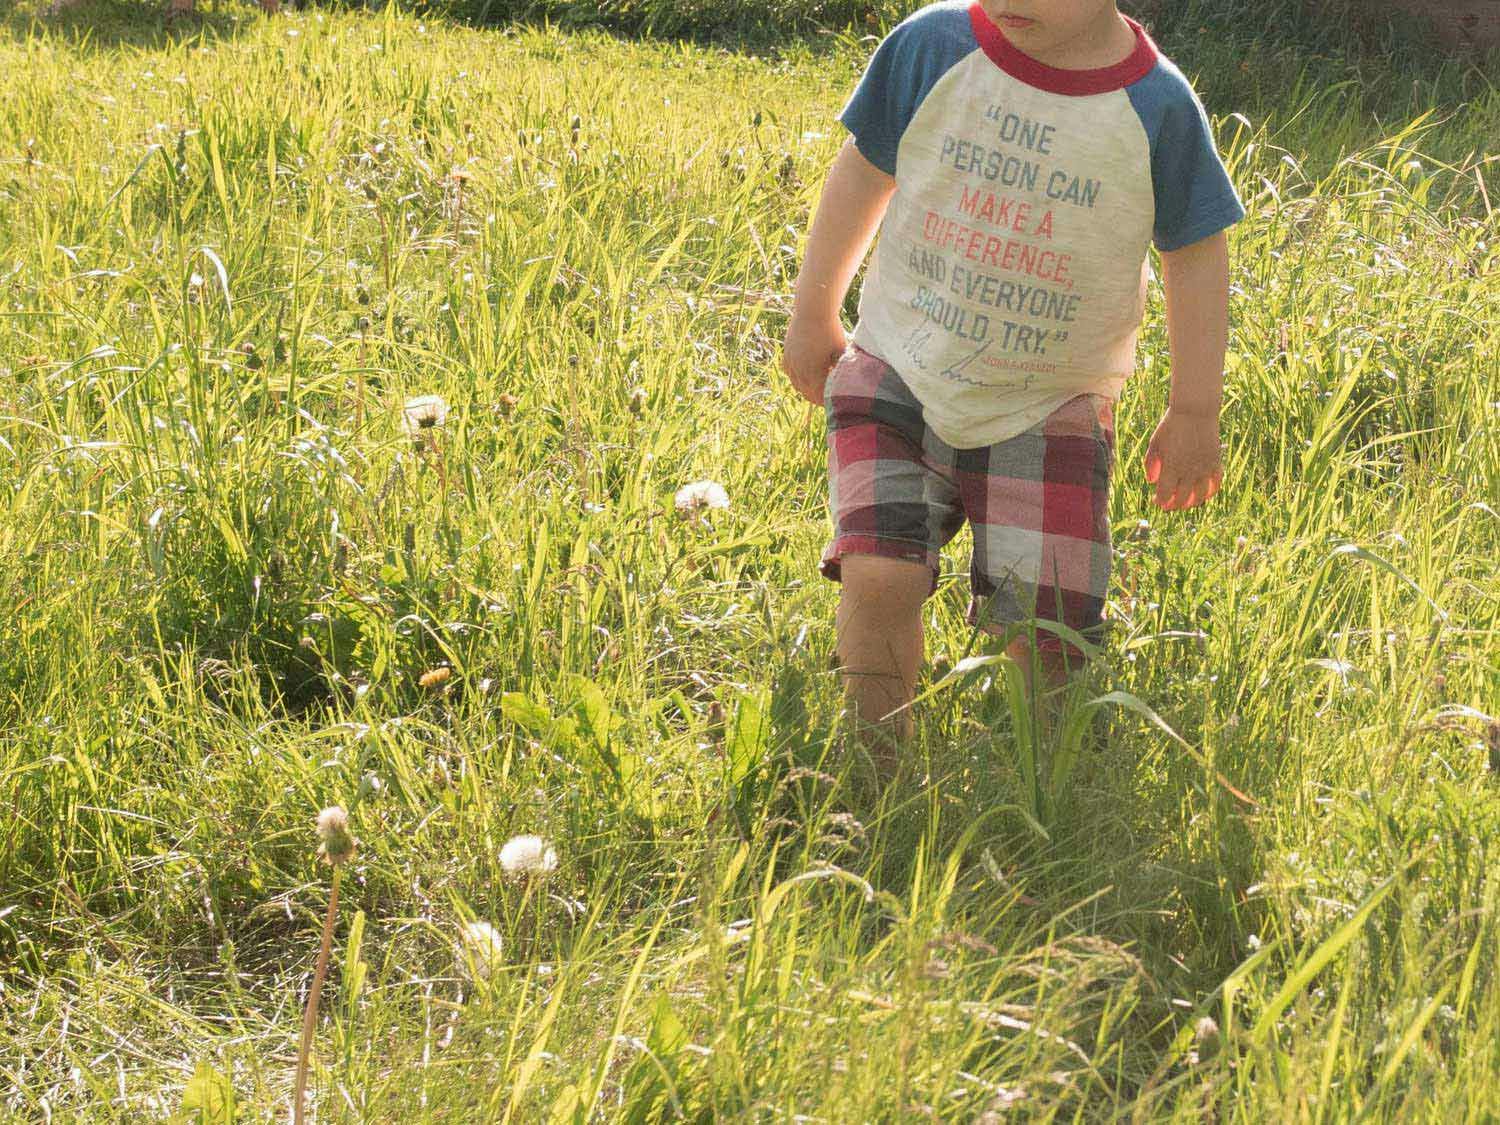 A 3-year-old child walks through an unkempt grassy field dotted with fluffy white dandelion seedheads.